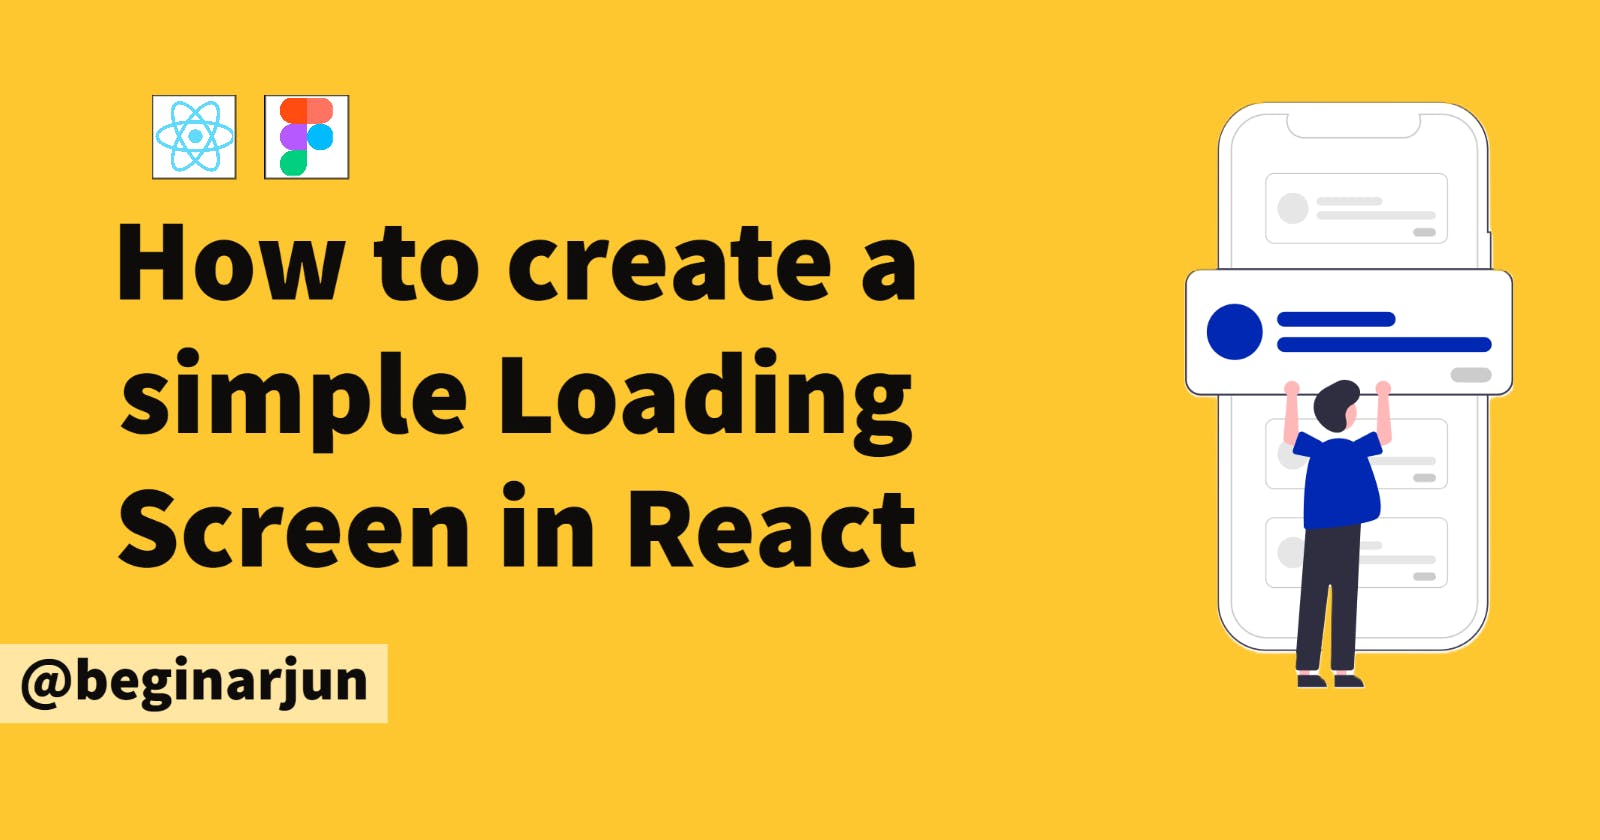 How to create a simple Loading Screen in React